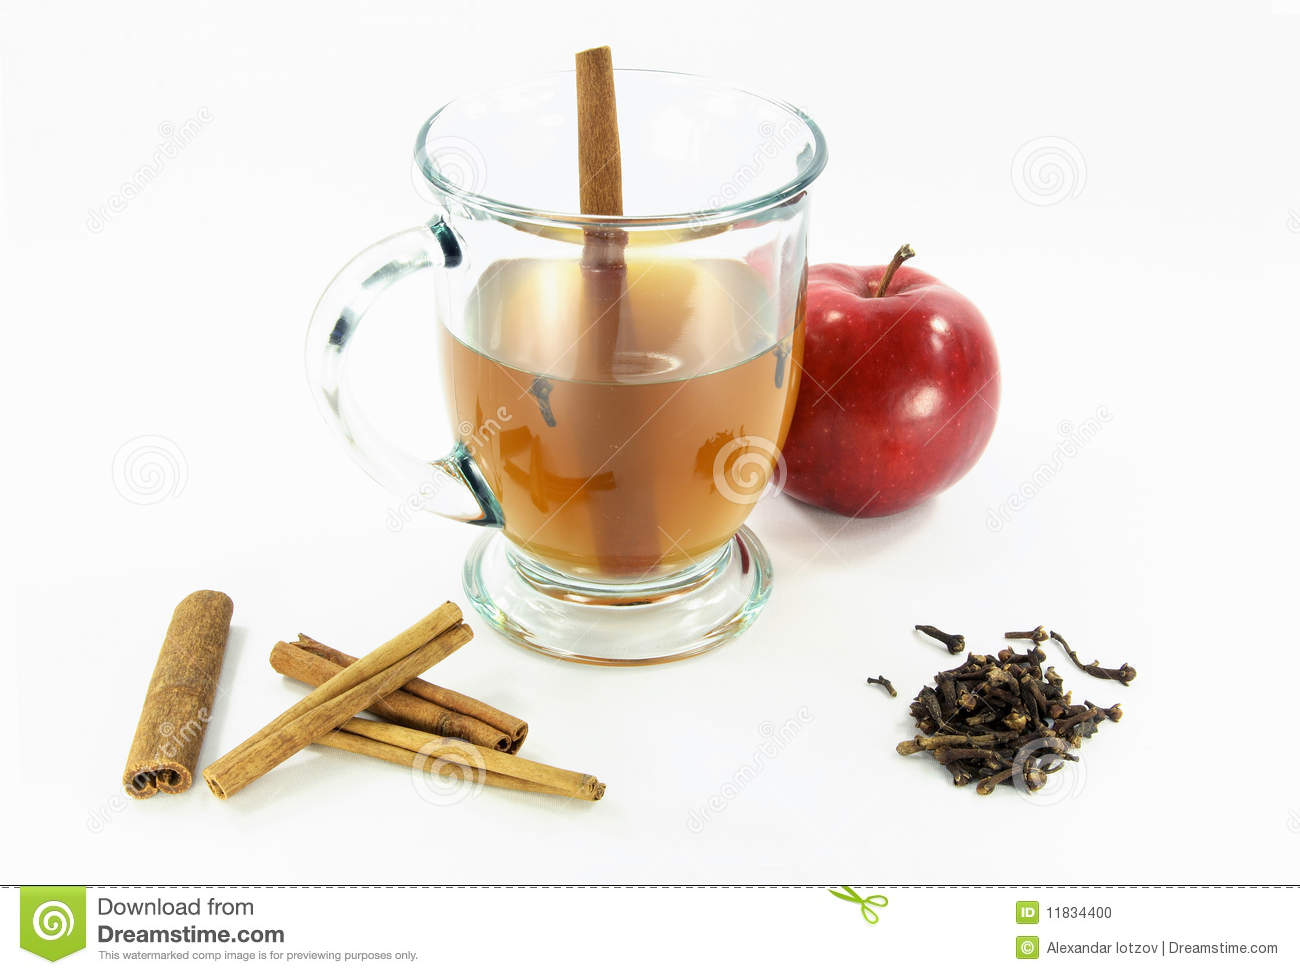 Hot Apple Cider In Glass Over White 02  Stock Photo   Image  11834400